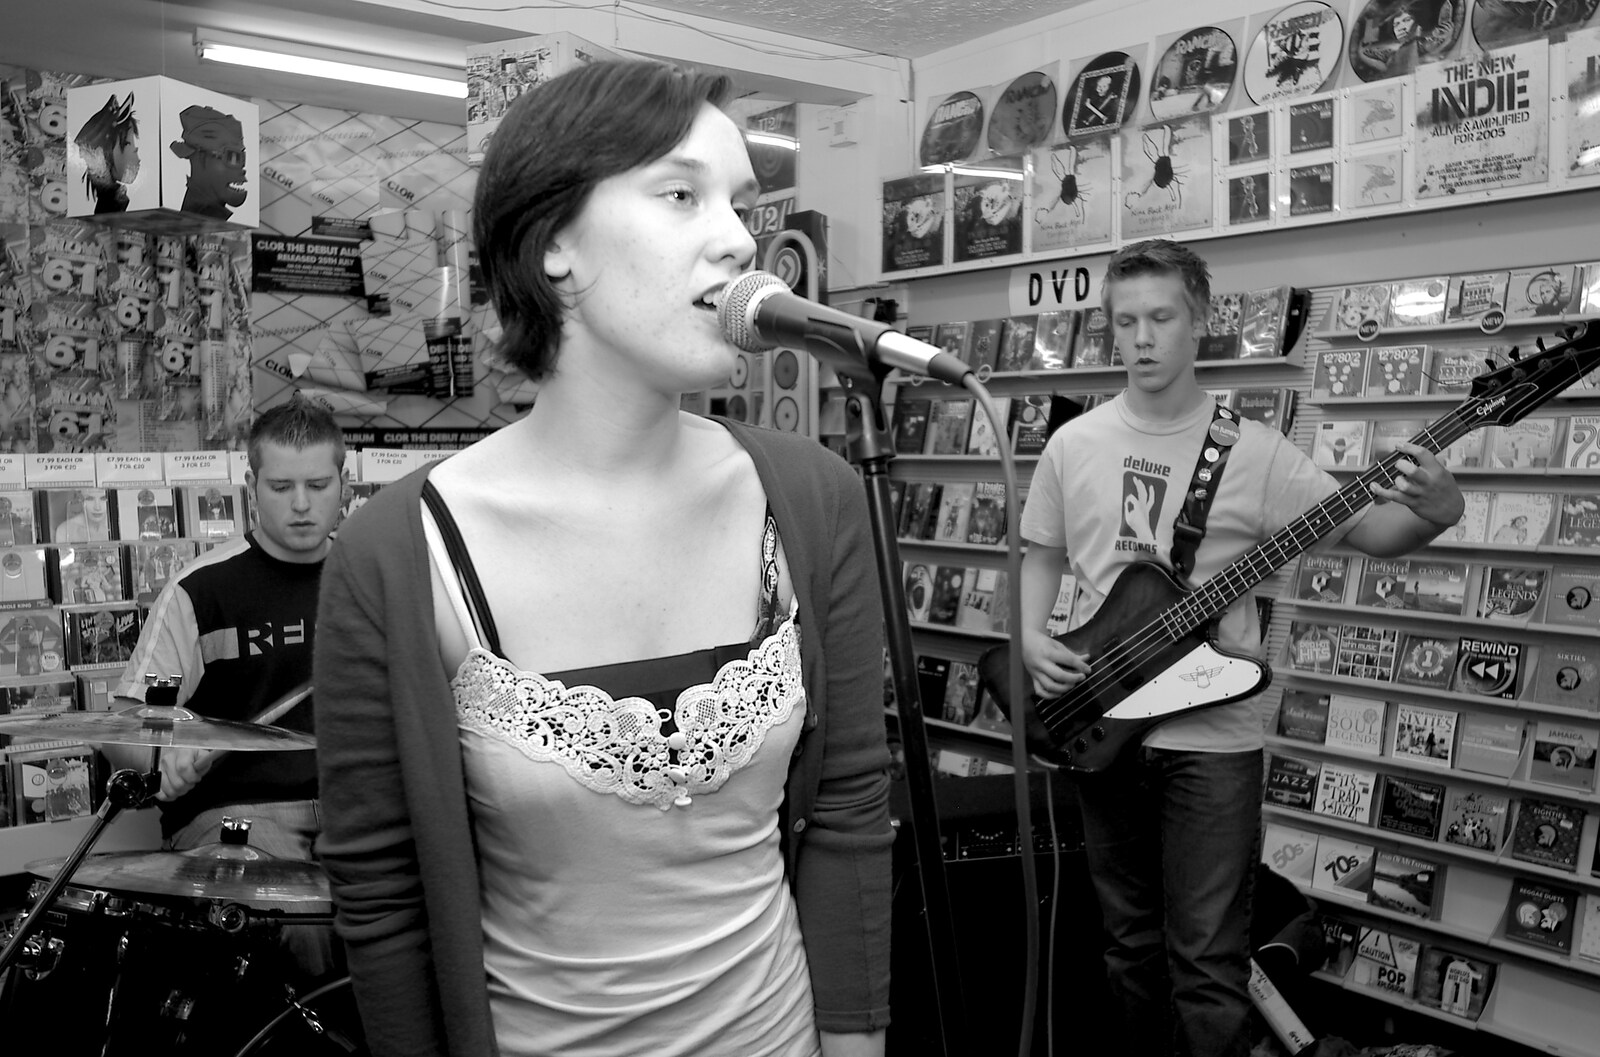 Alex sings from Richard Panton's Van and Alex Hill at Revolution Records, Diss and Cambridge - 29th July 2005